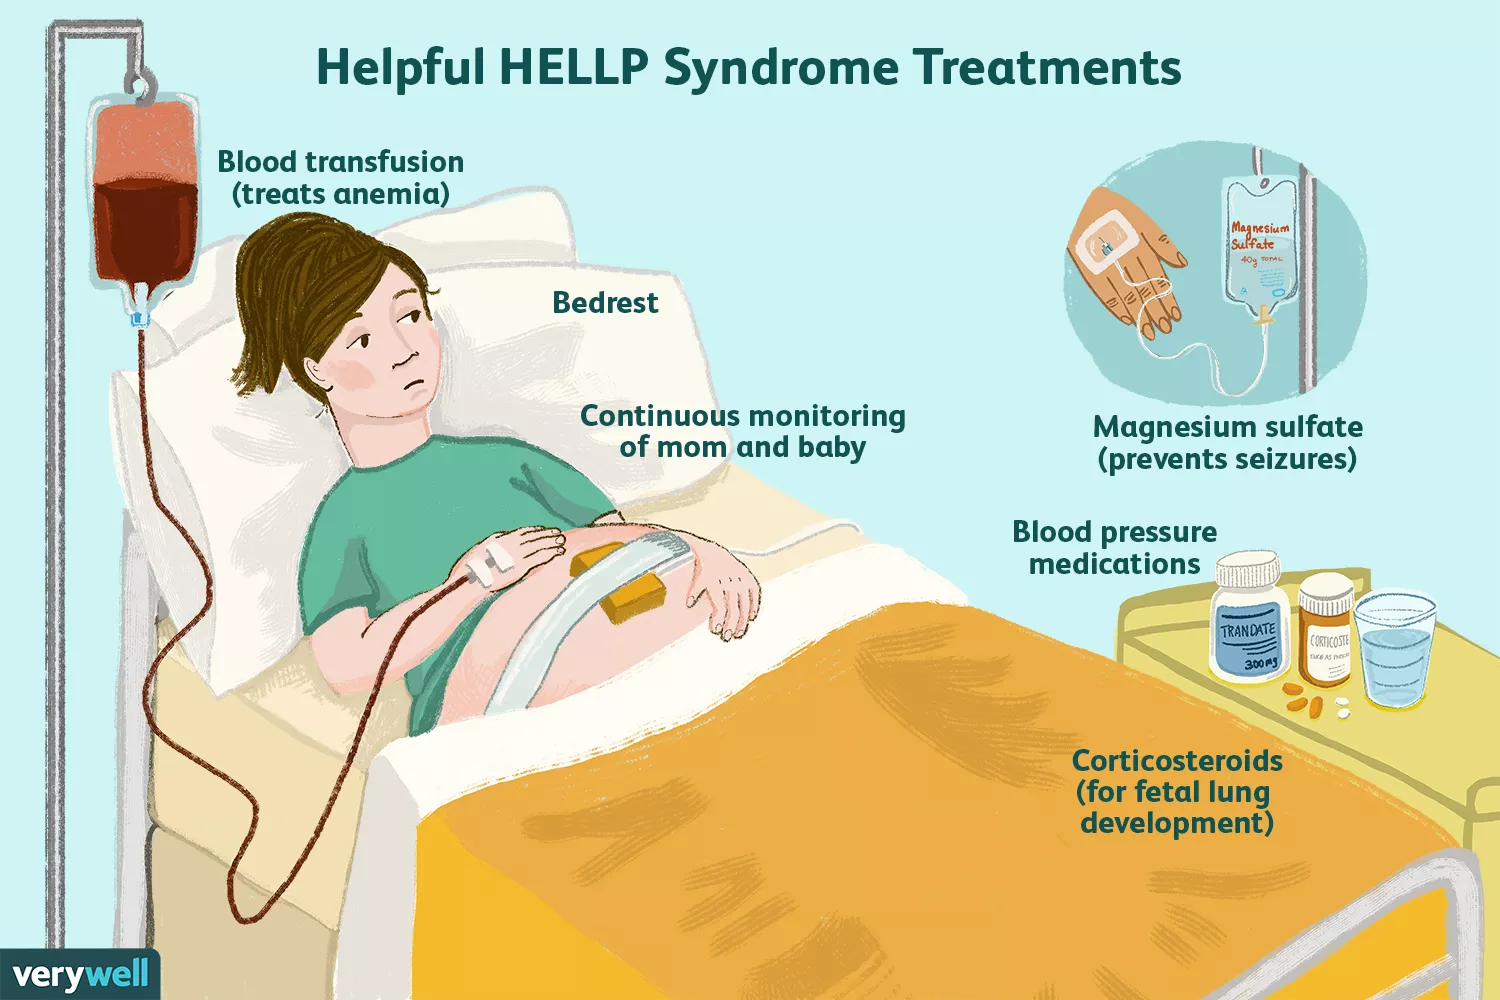 Helpful HELLP syndrome treatments